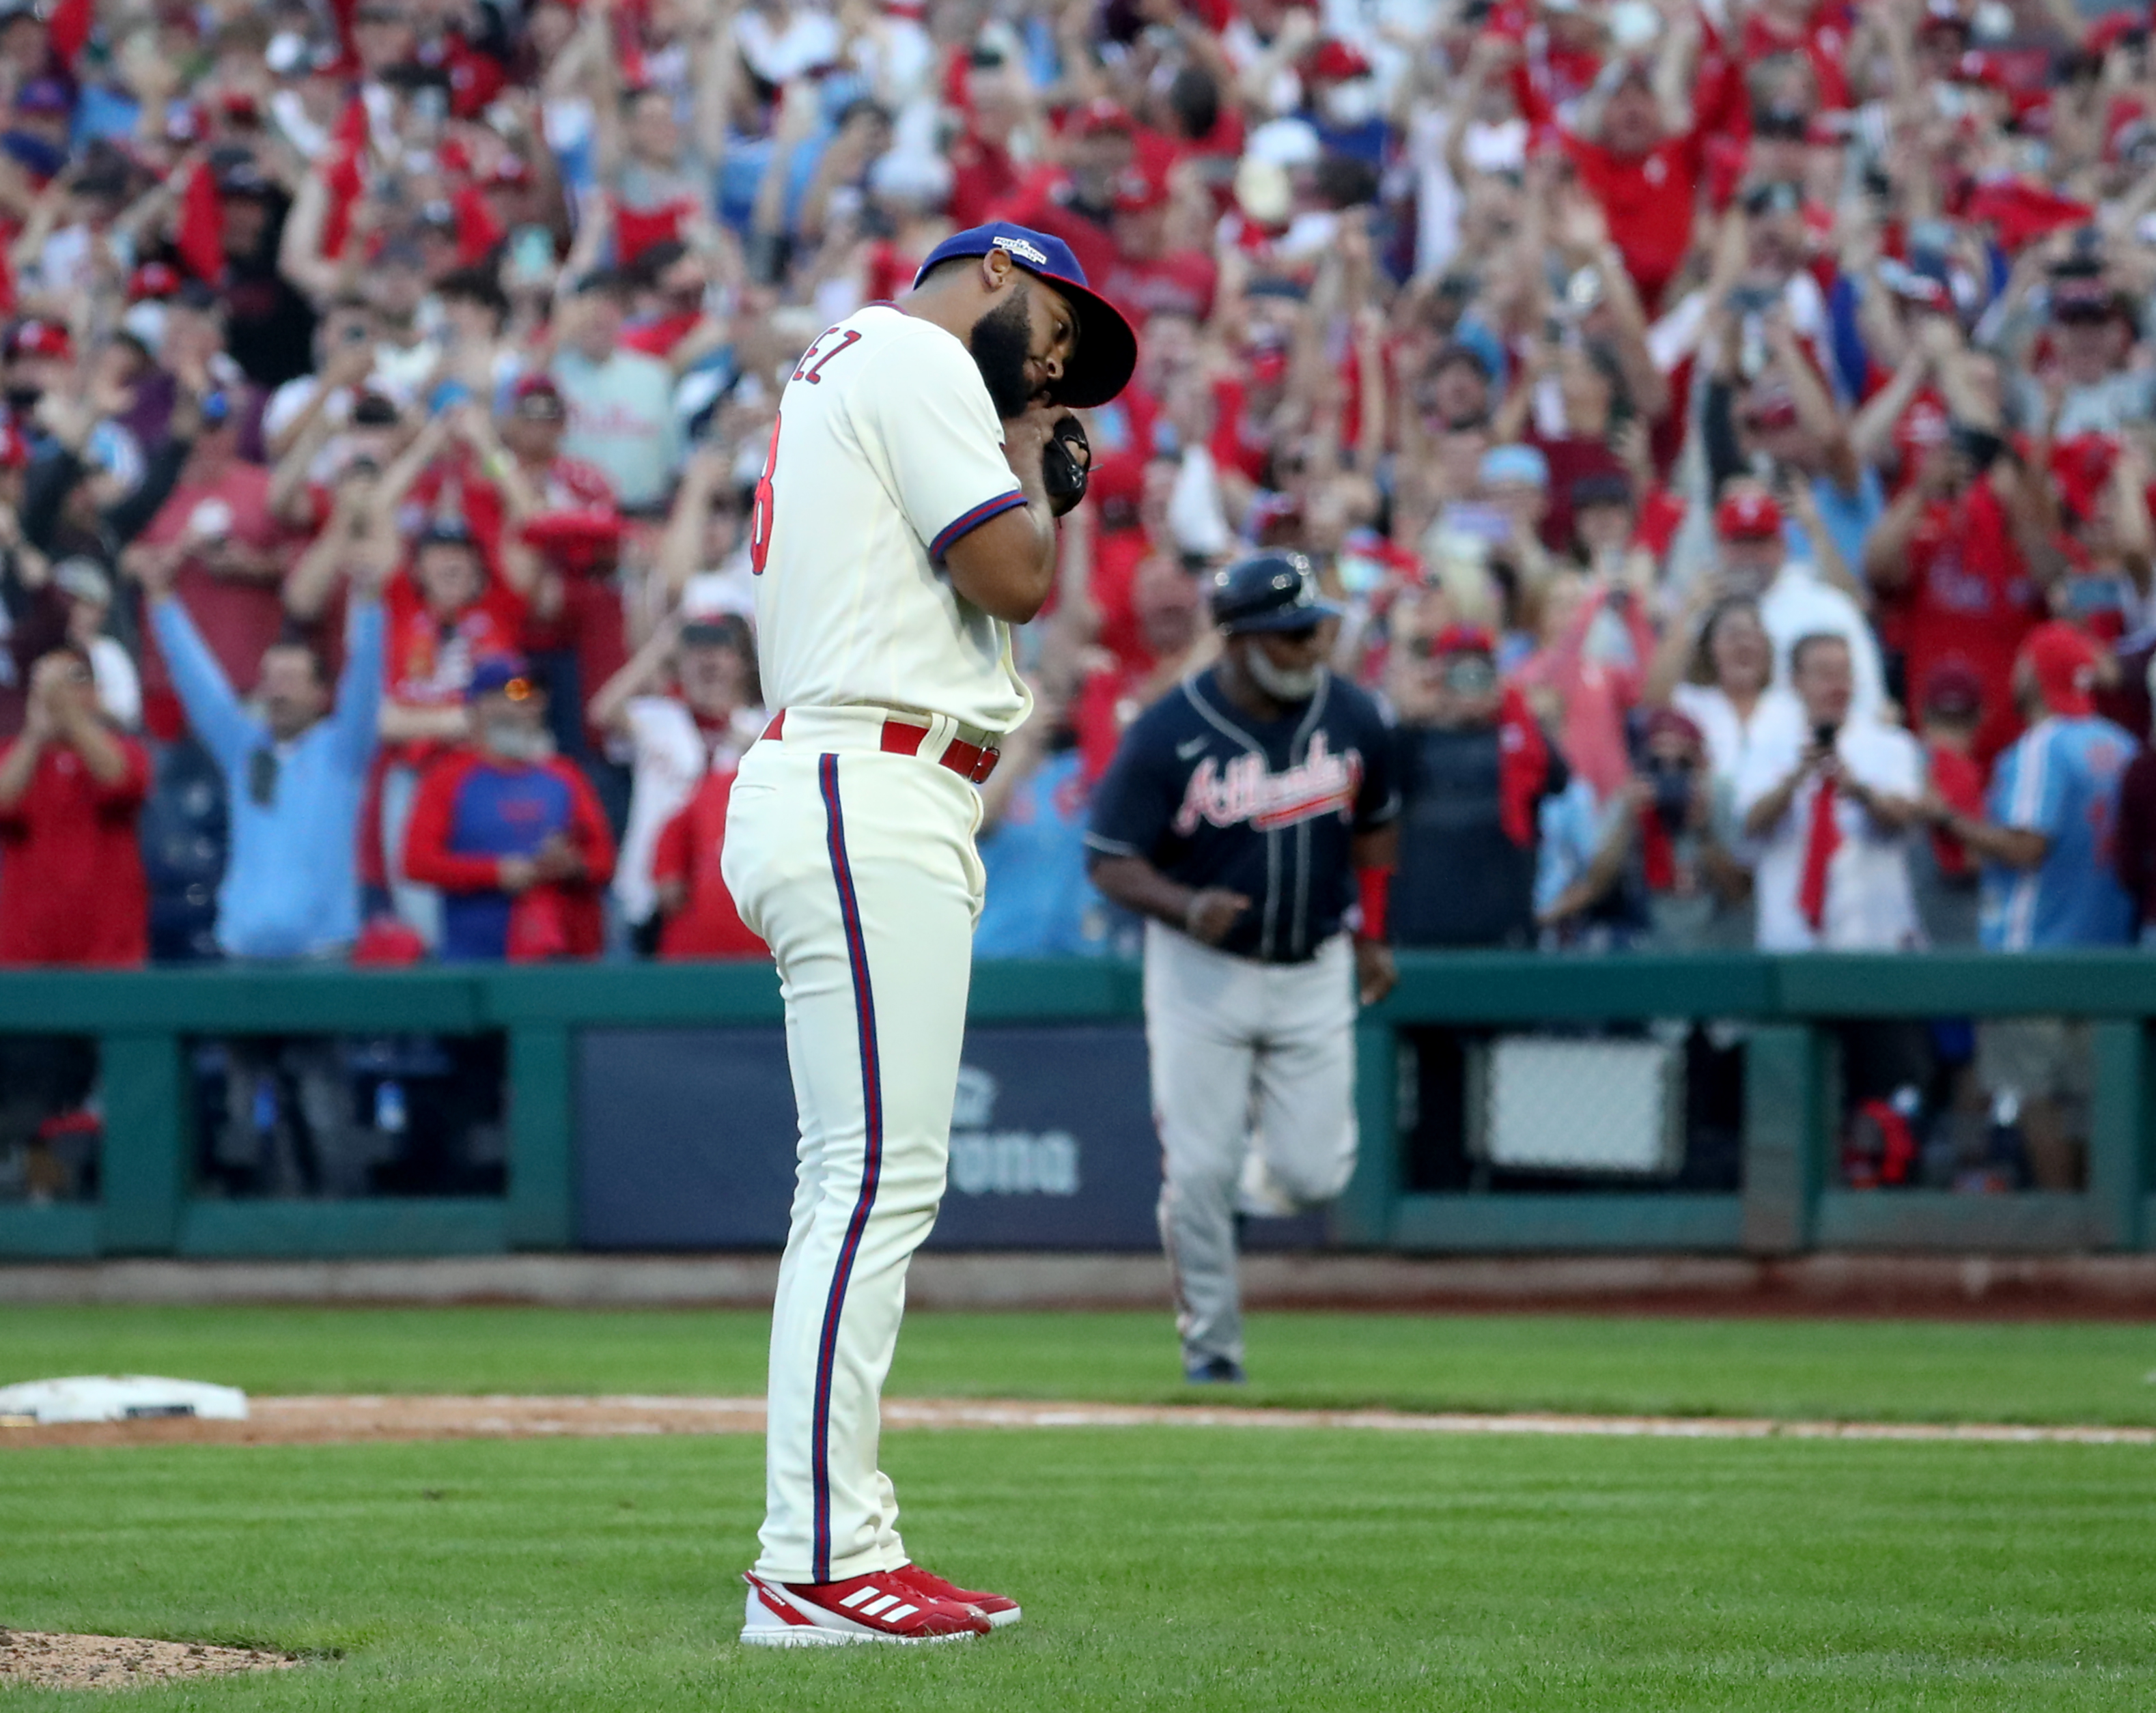 Phillies advance to NLCS, knock out defending champs behind Marsh